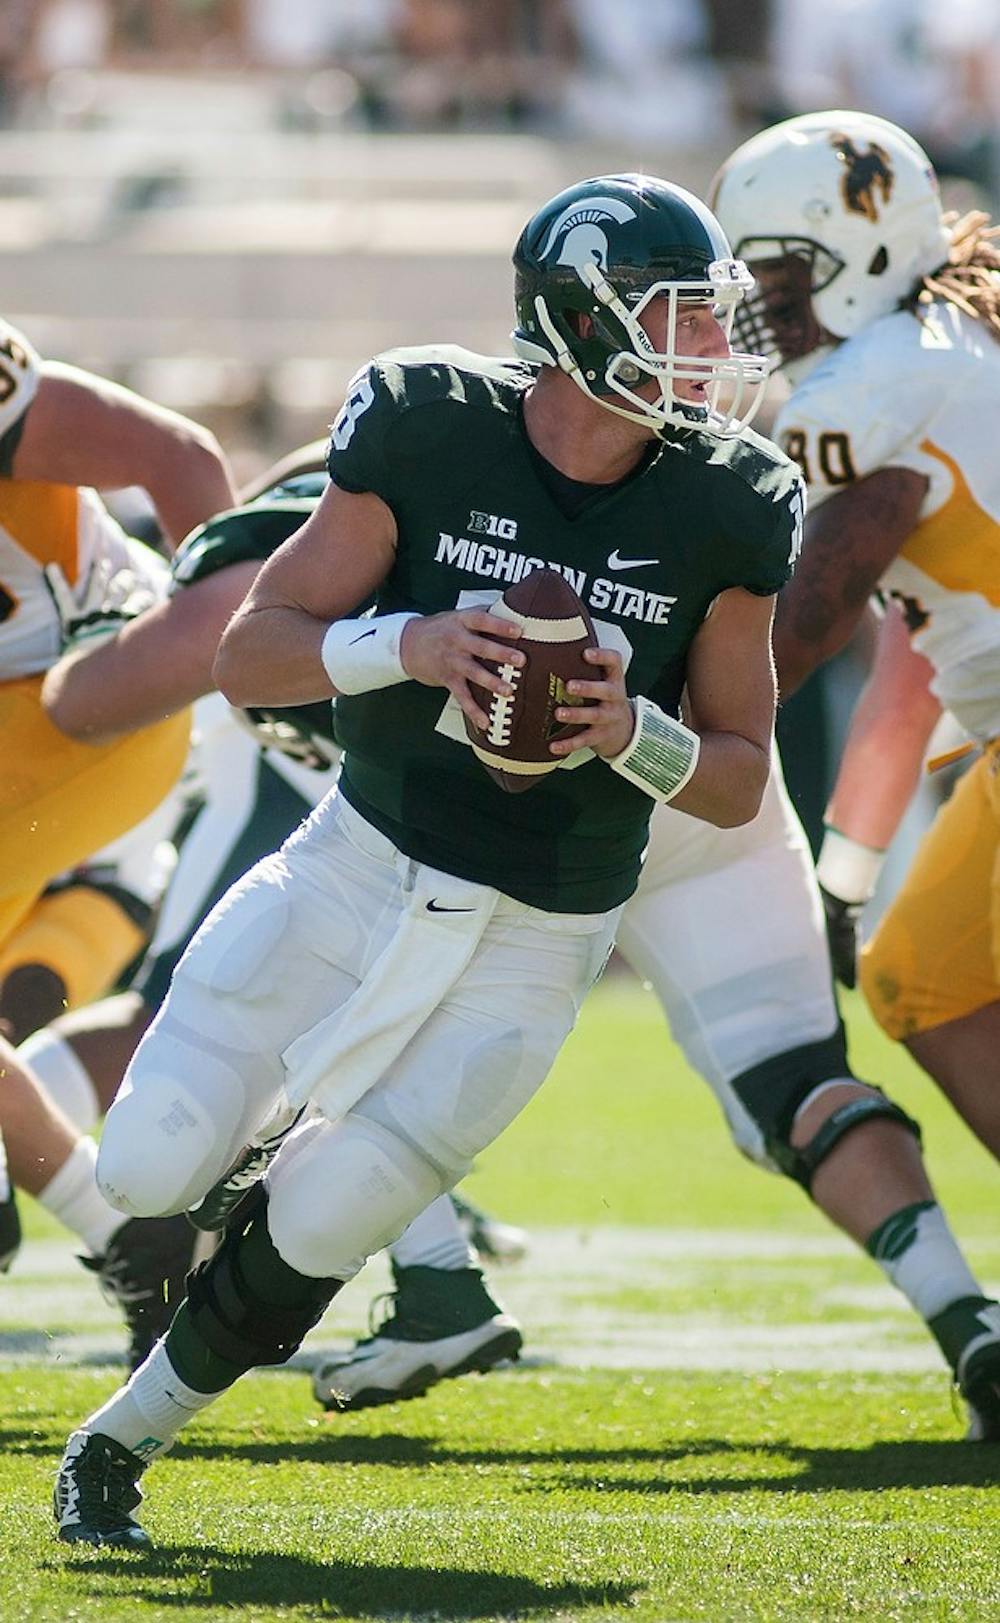 <p>Junior quarterback Connor Cook looks to pass during the game against Wyoming on Sept. 27, 2014, at Spartan Stadium. The Spartans defeated the Cowboys, 56-14. Raymond Williams/The State News</p>